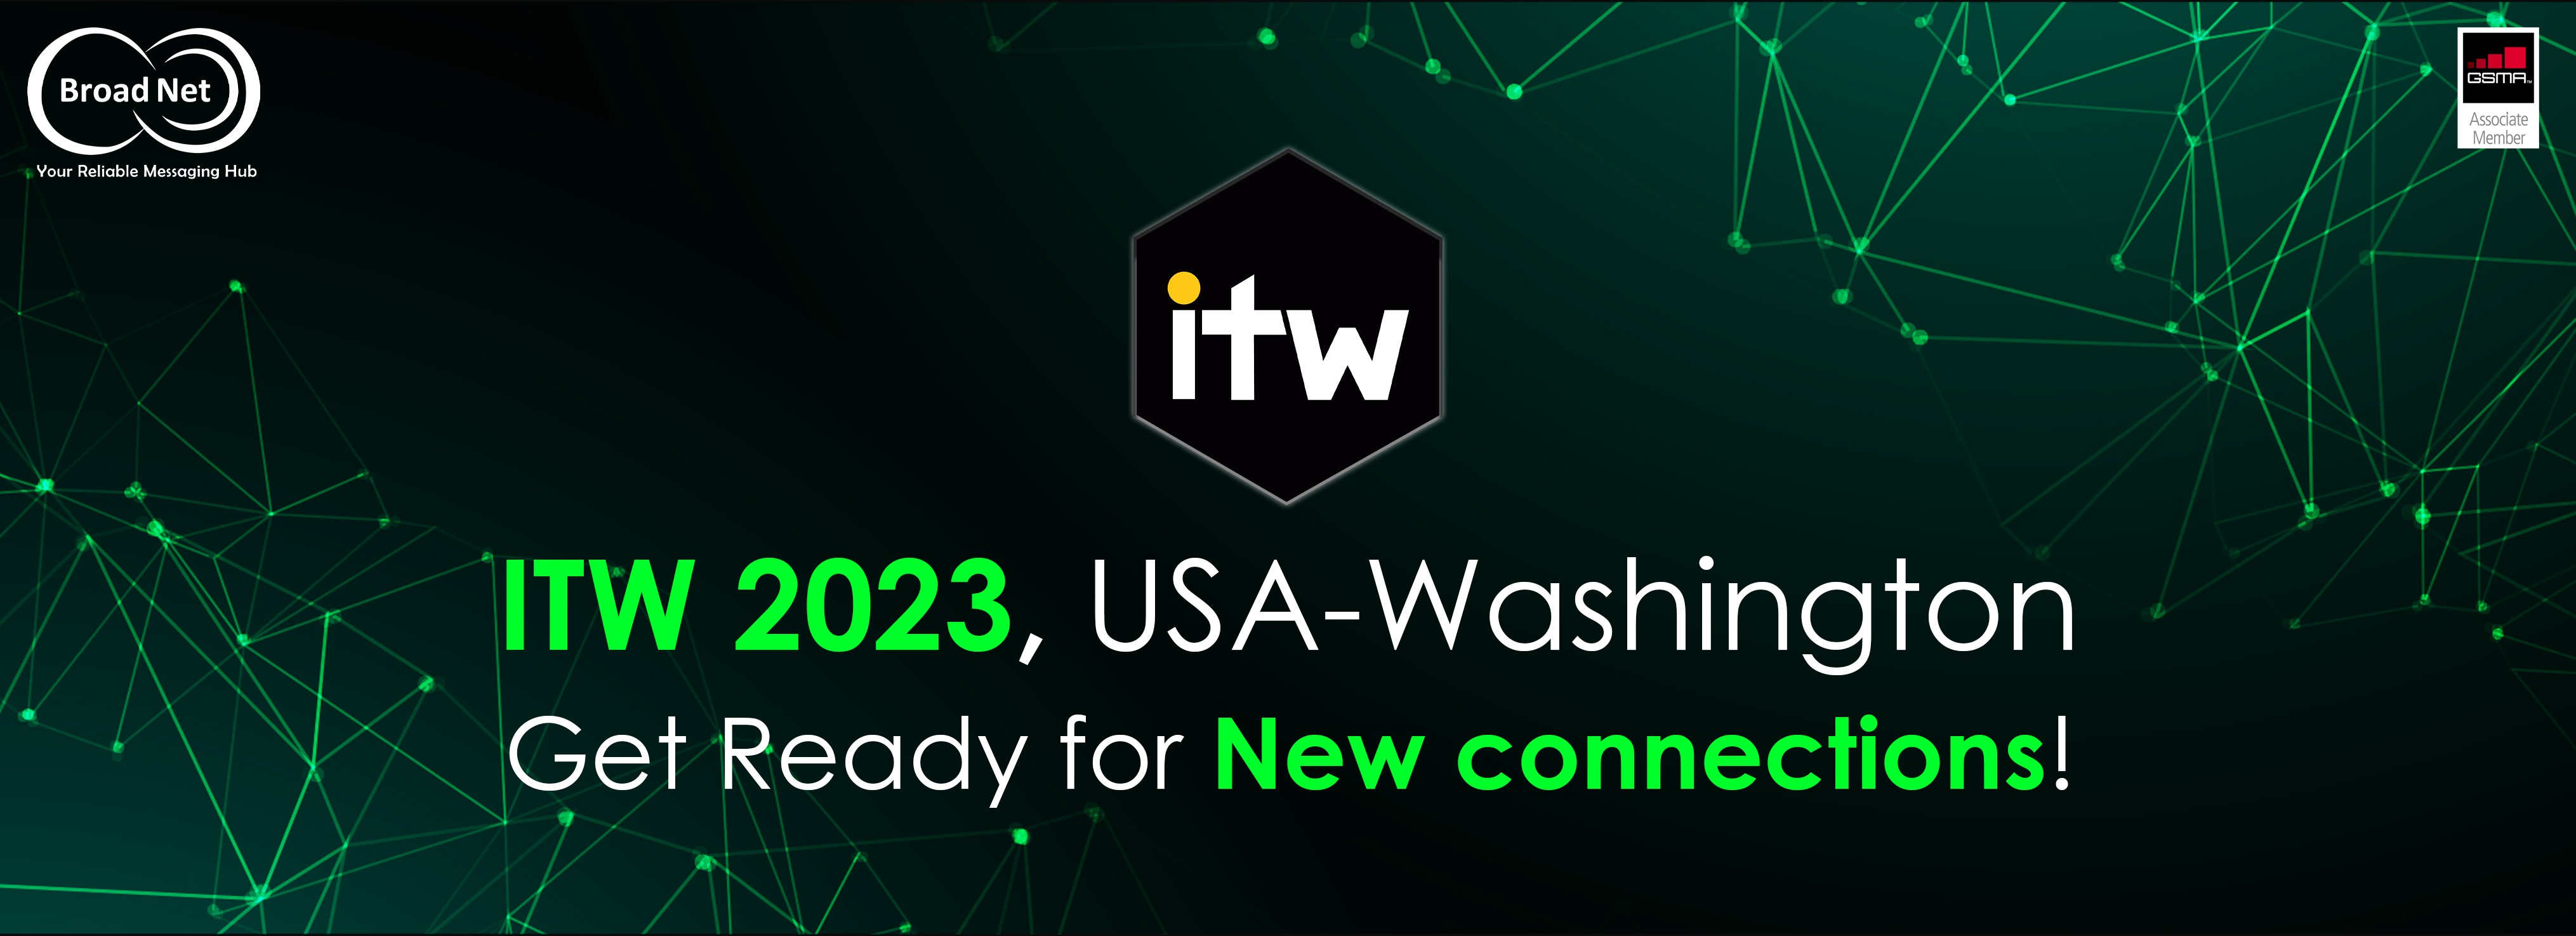 ITW 2023, USA-Washington. Get Ready for New connections!